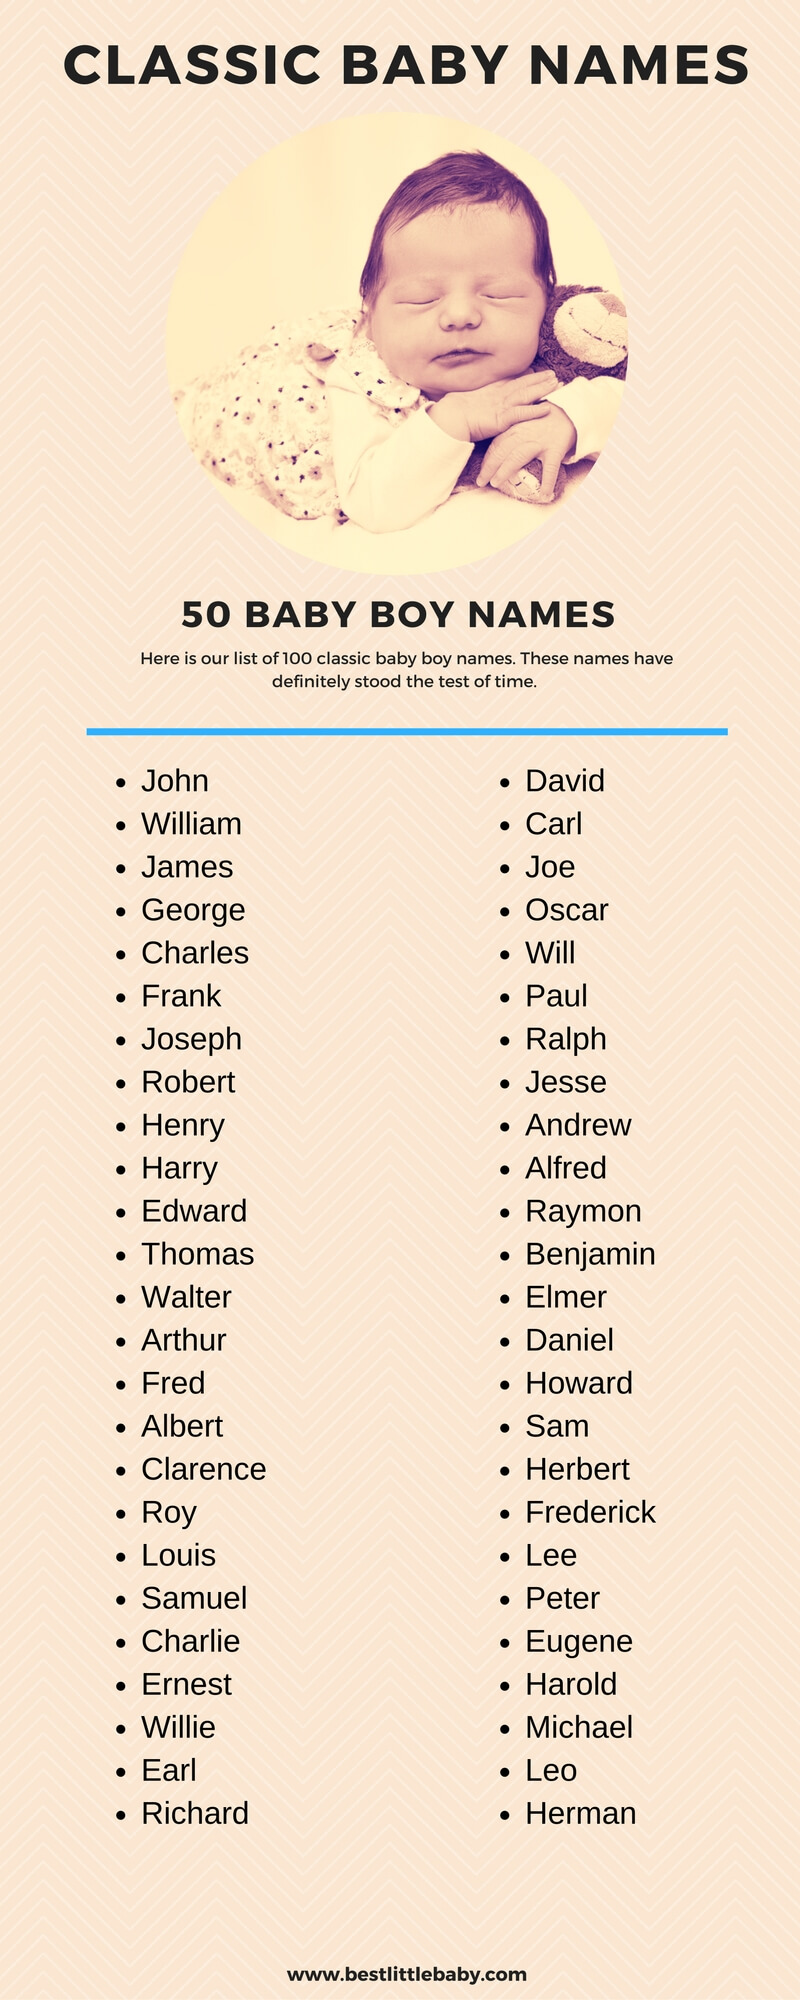 Top 50 Classic Baby Boy Names